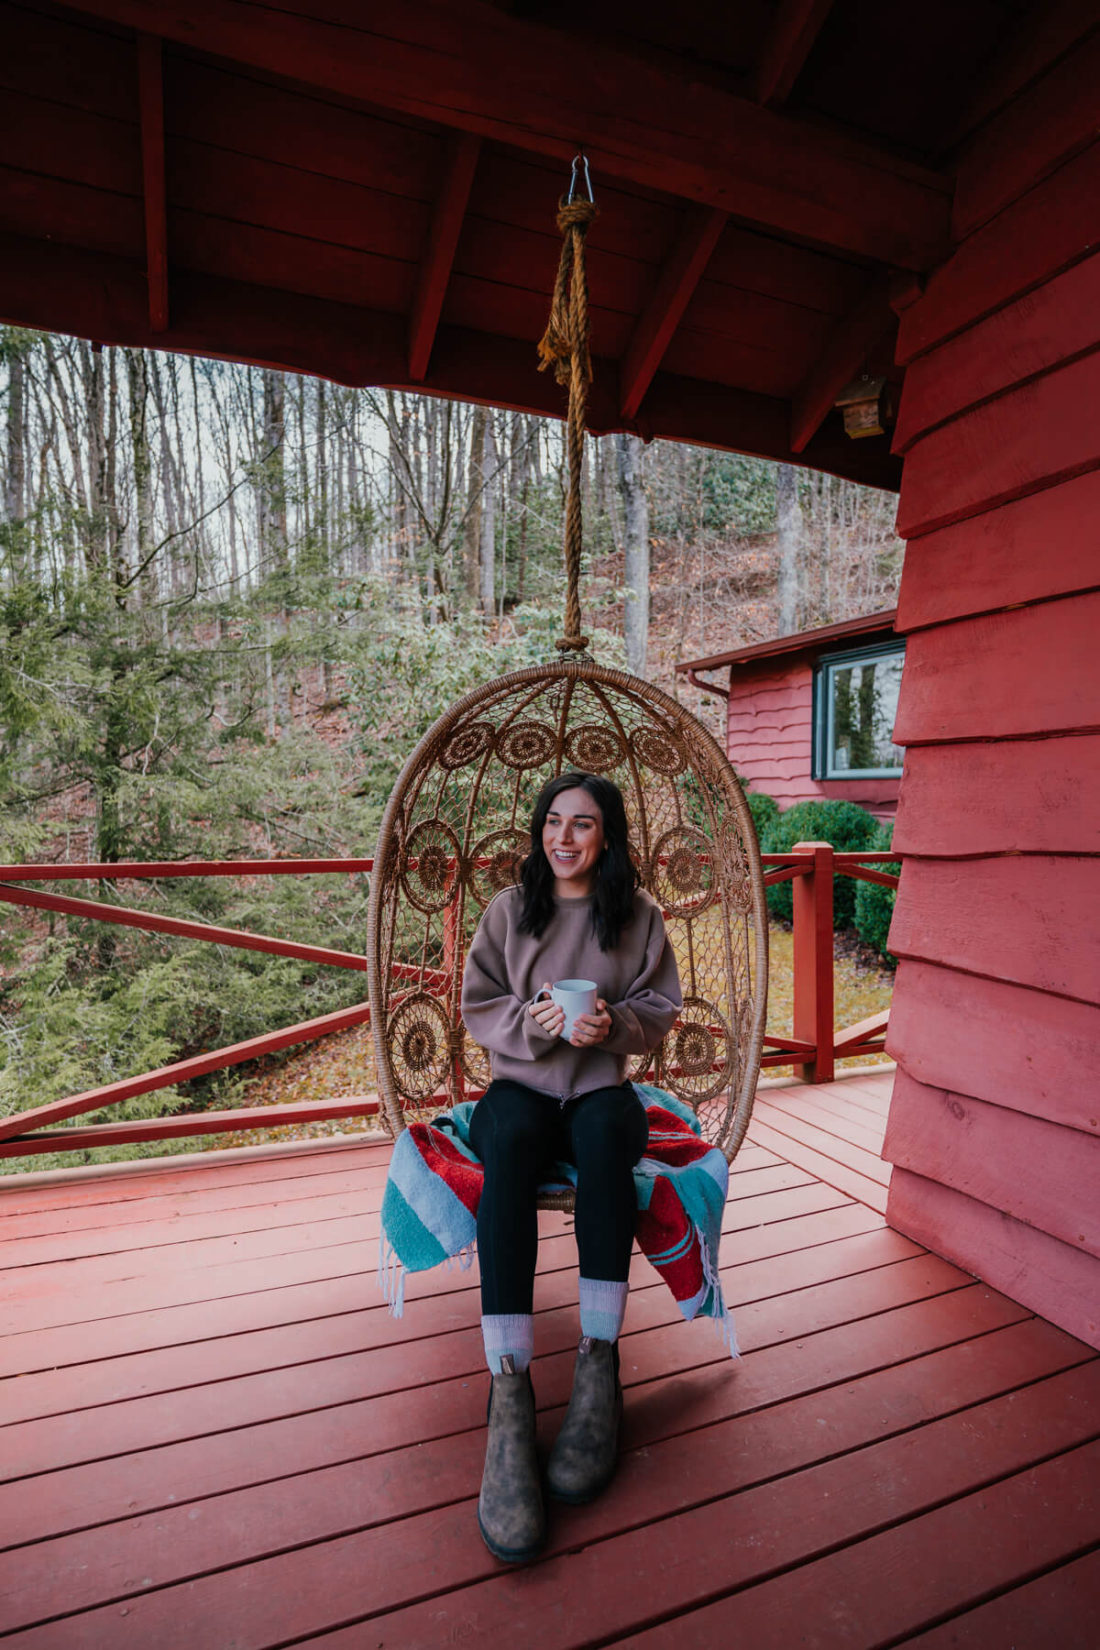 Woman sitting in porch swing, smiling and holding a coffee mug